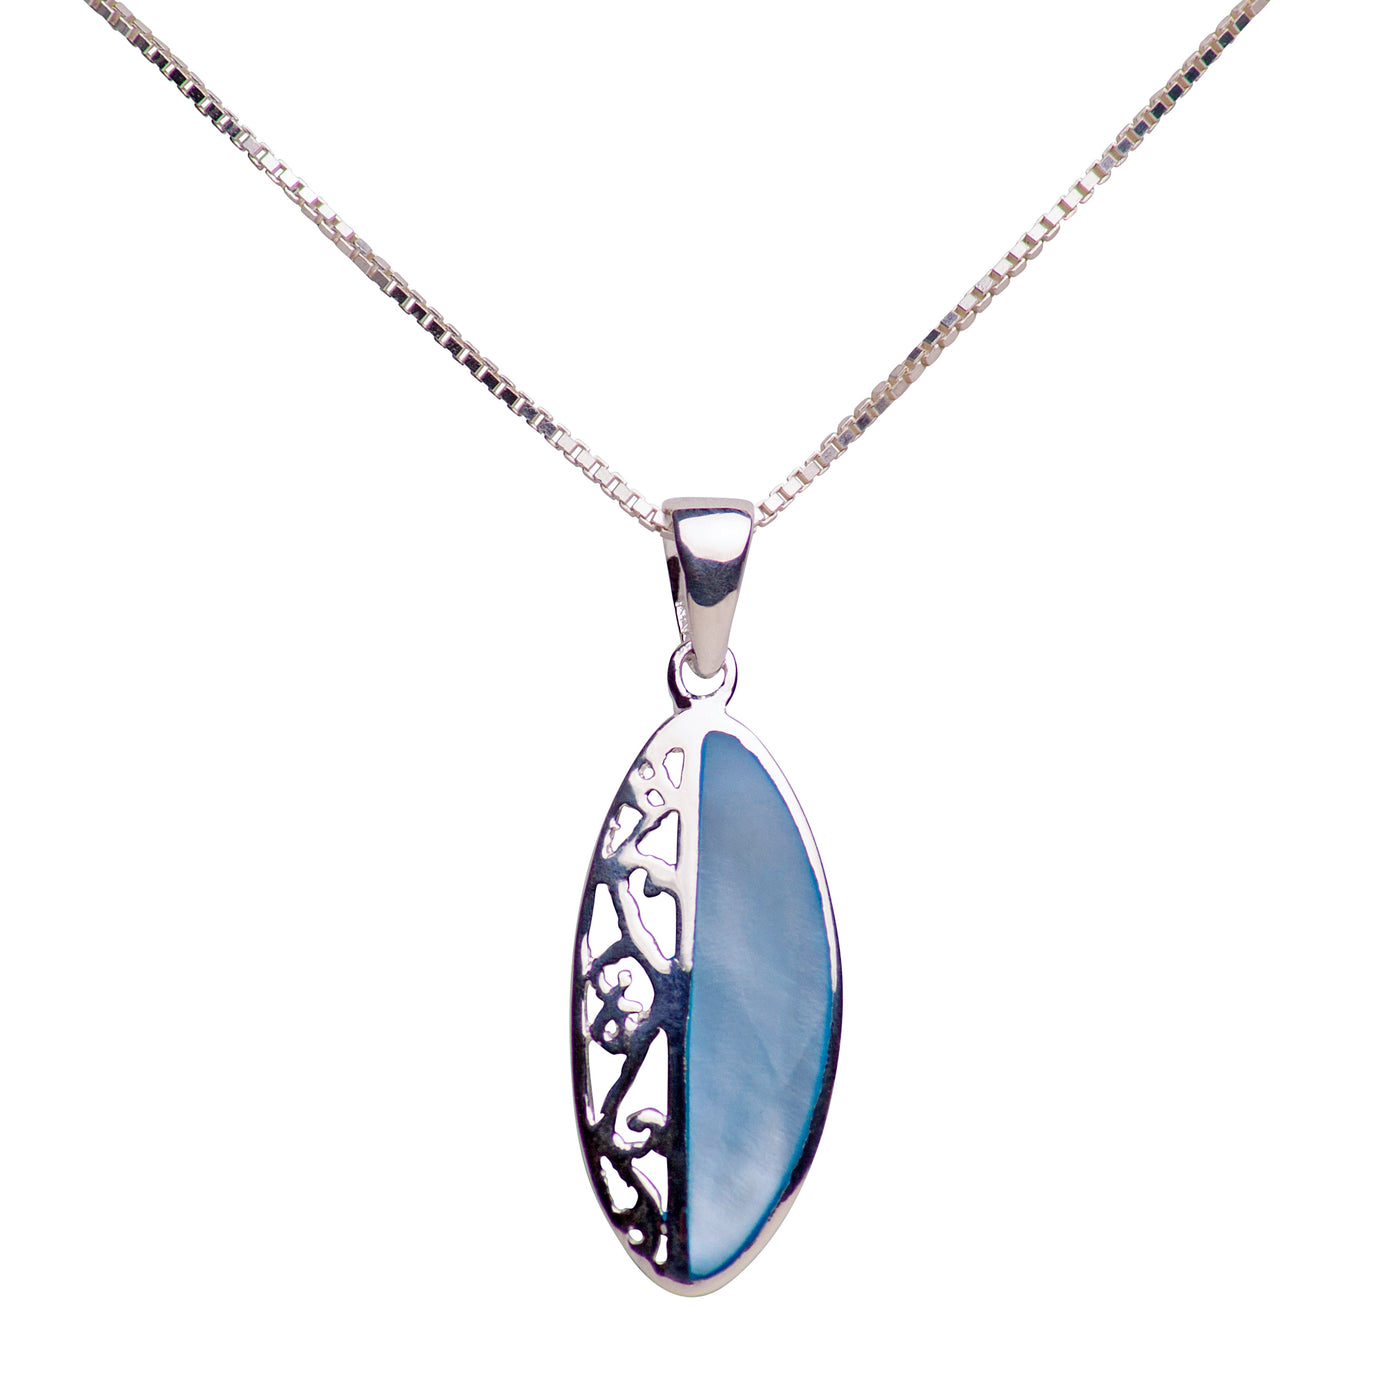 Blue Mother of Pearl Pendant Necklace